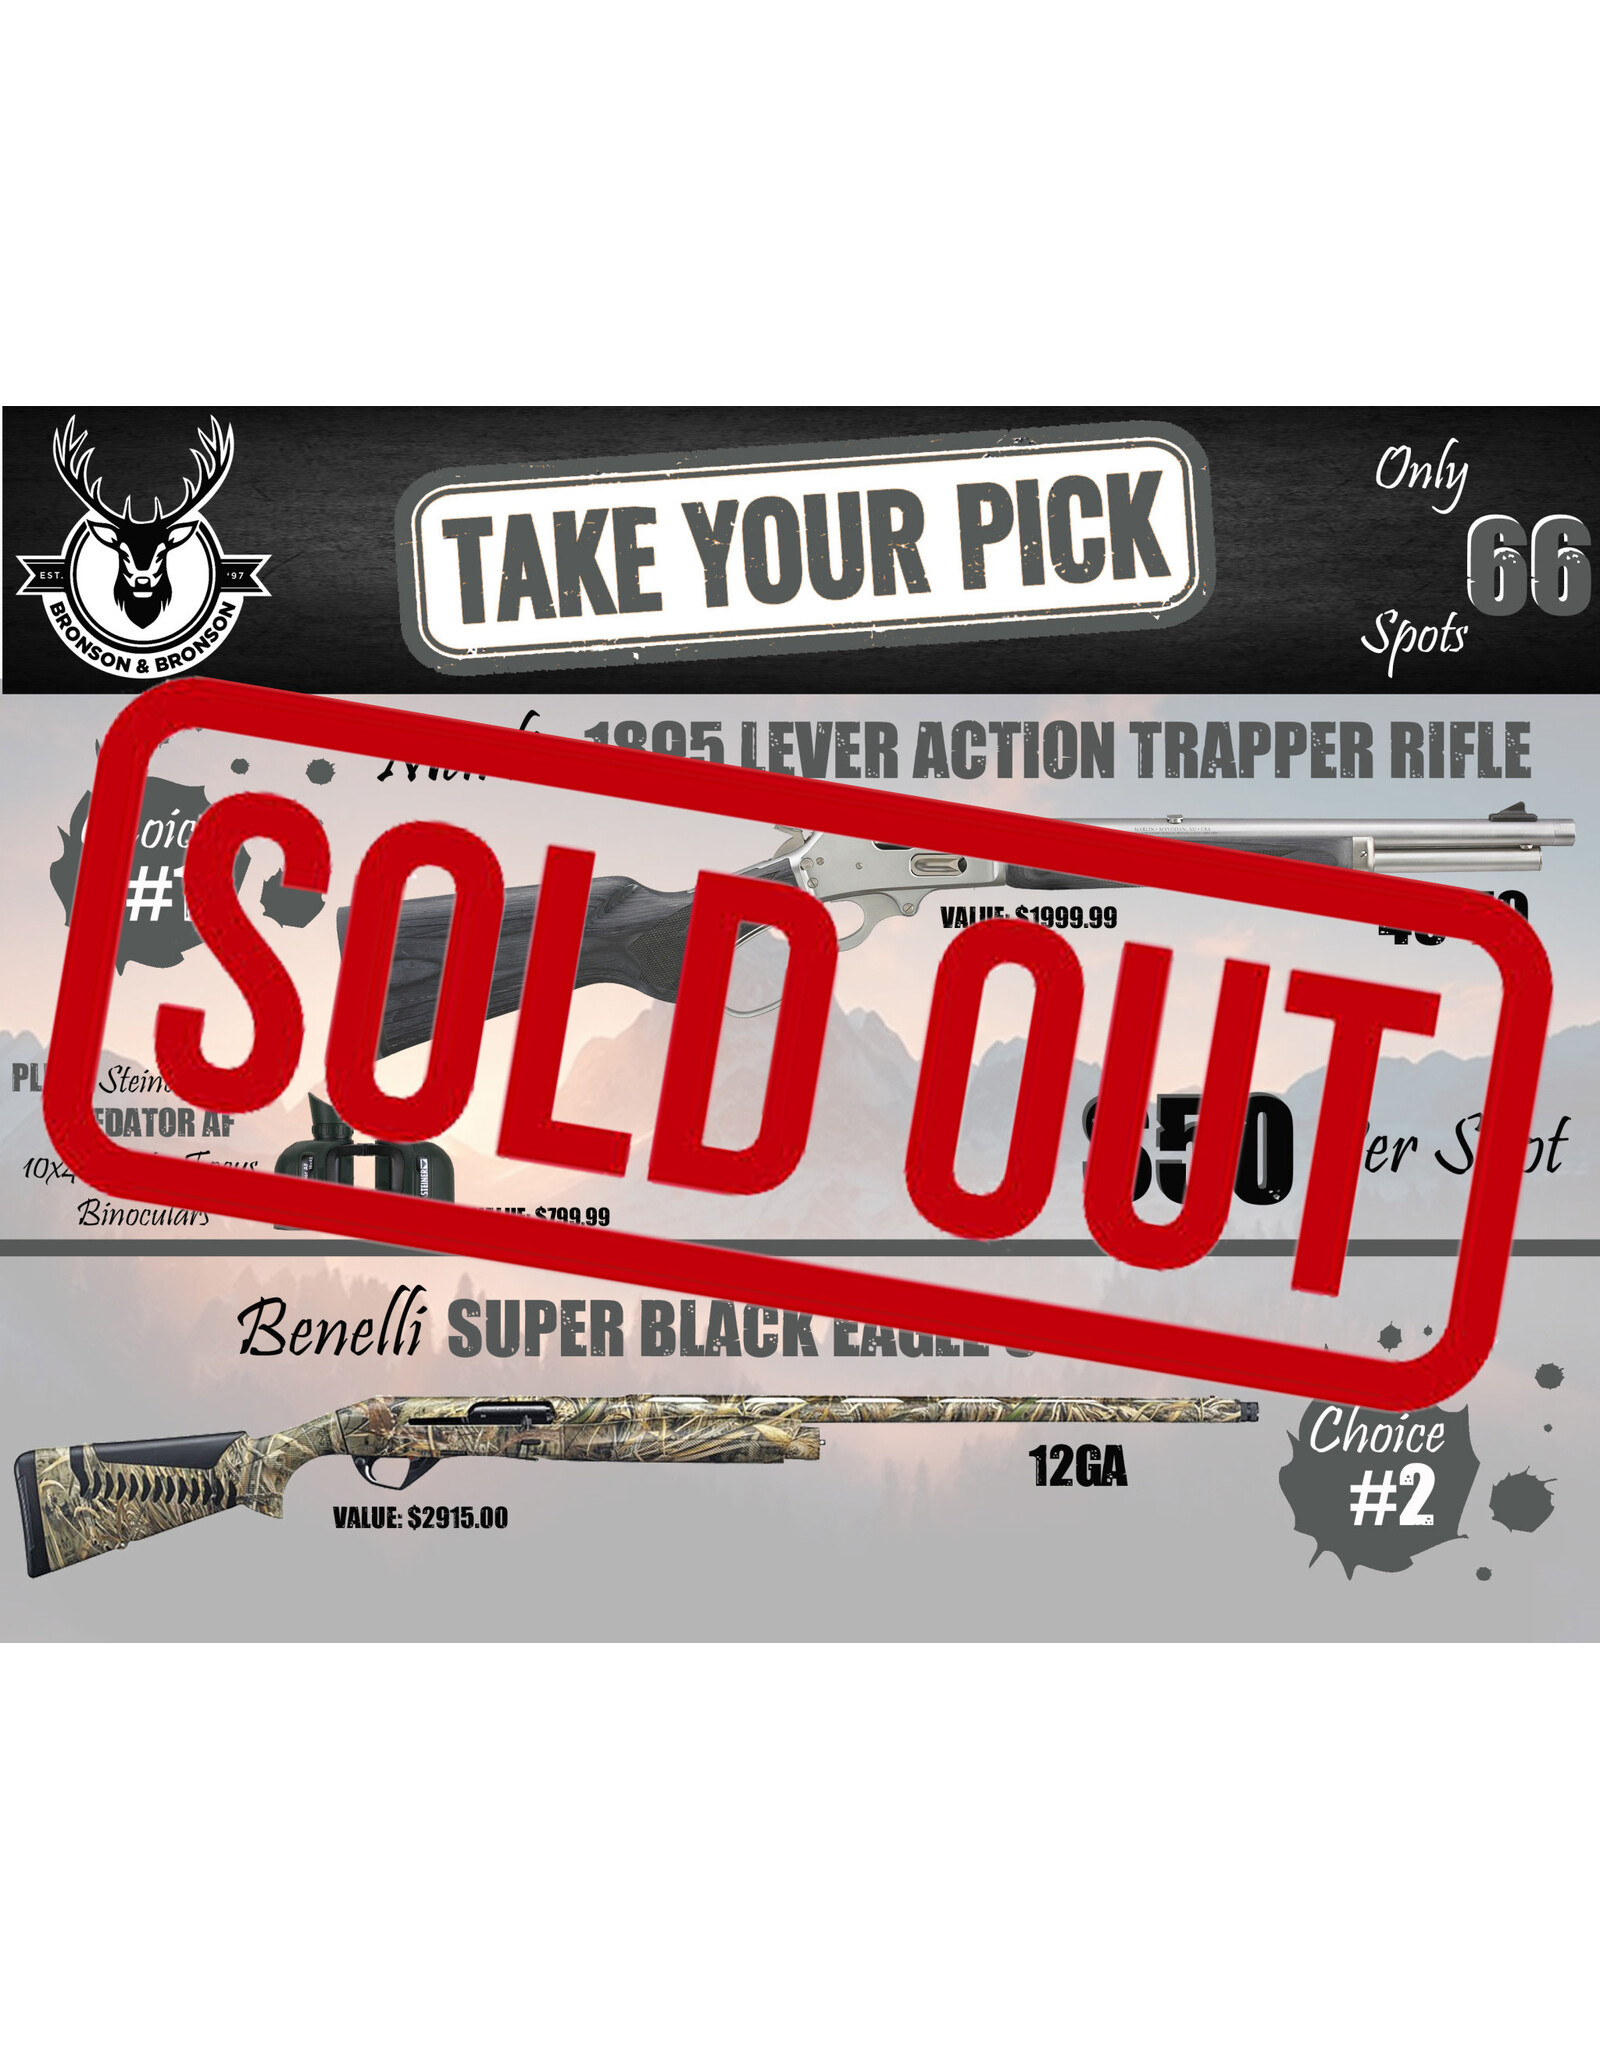 DRAW #1280 - Take Your Pick - Marlin+Steiner OR Benelli SBE3